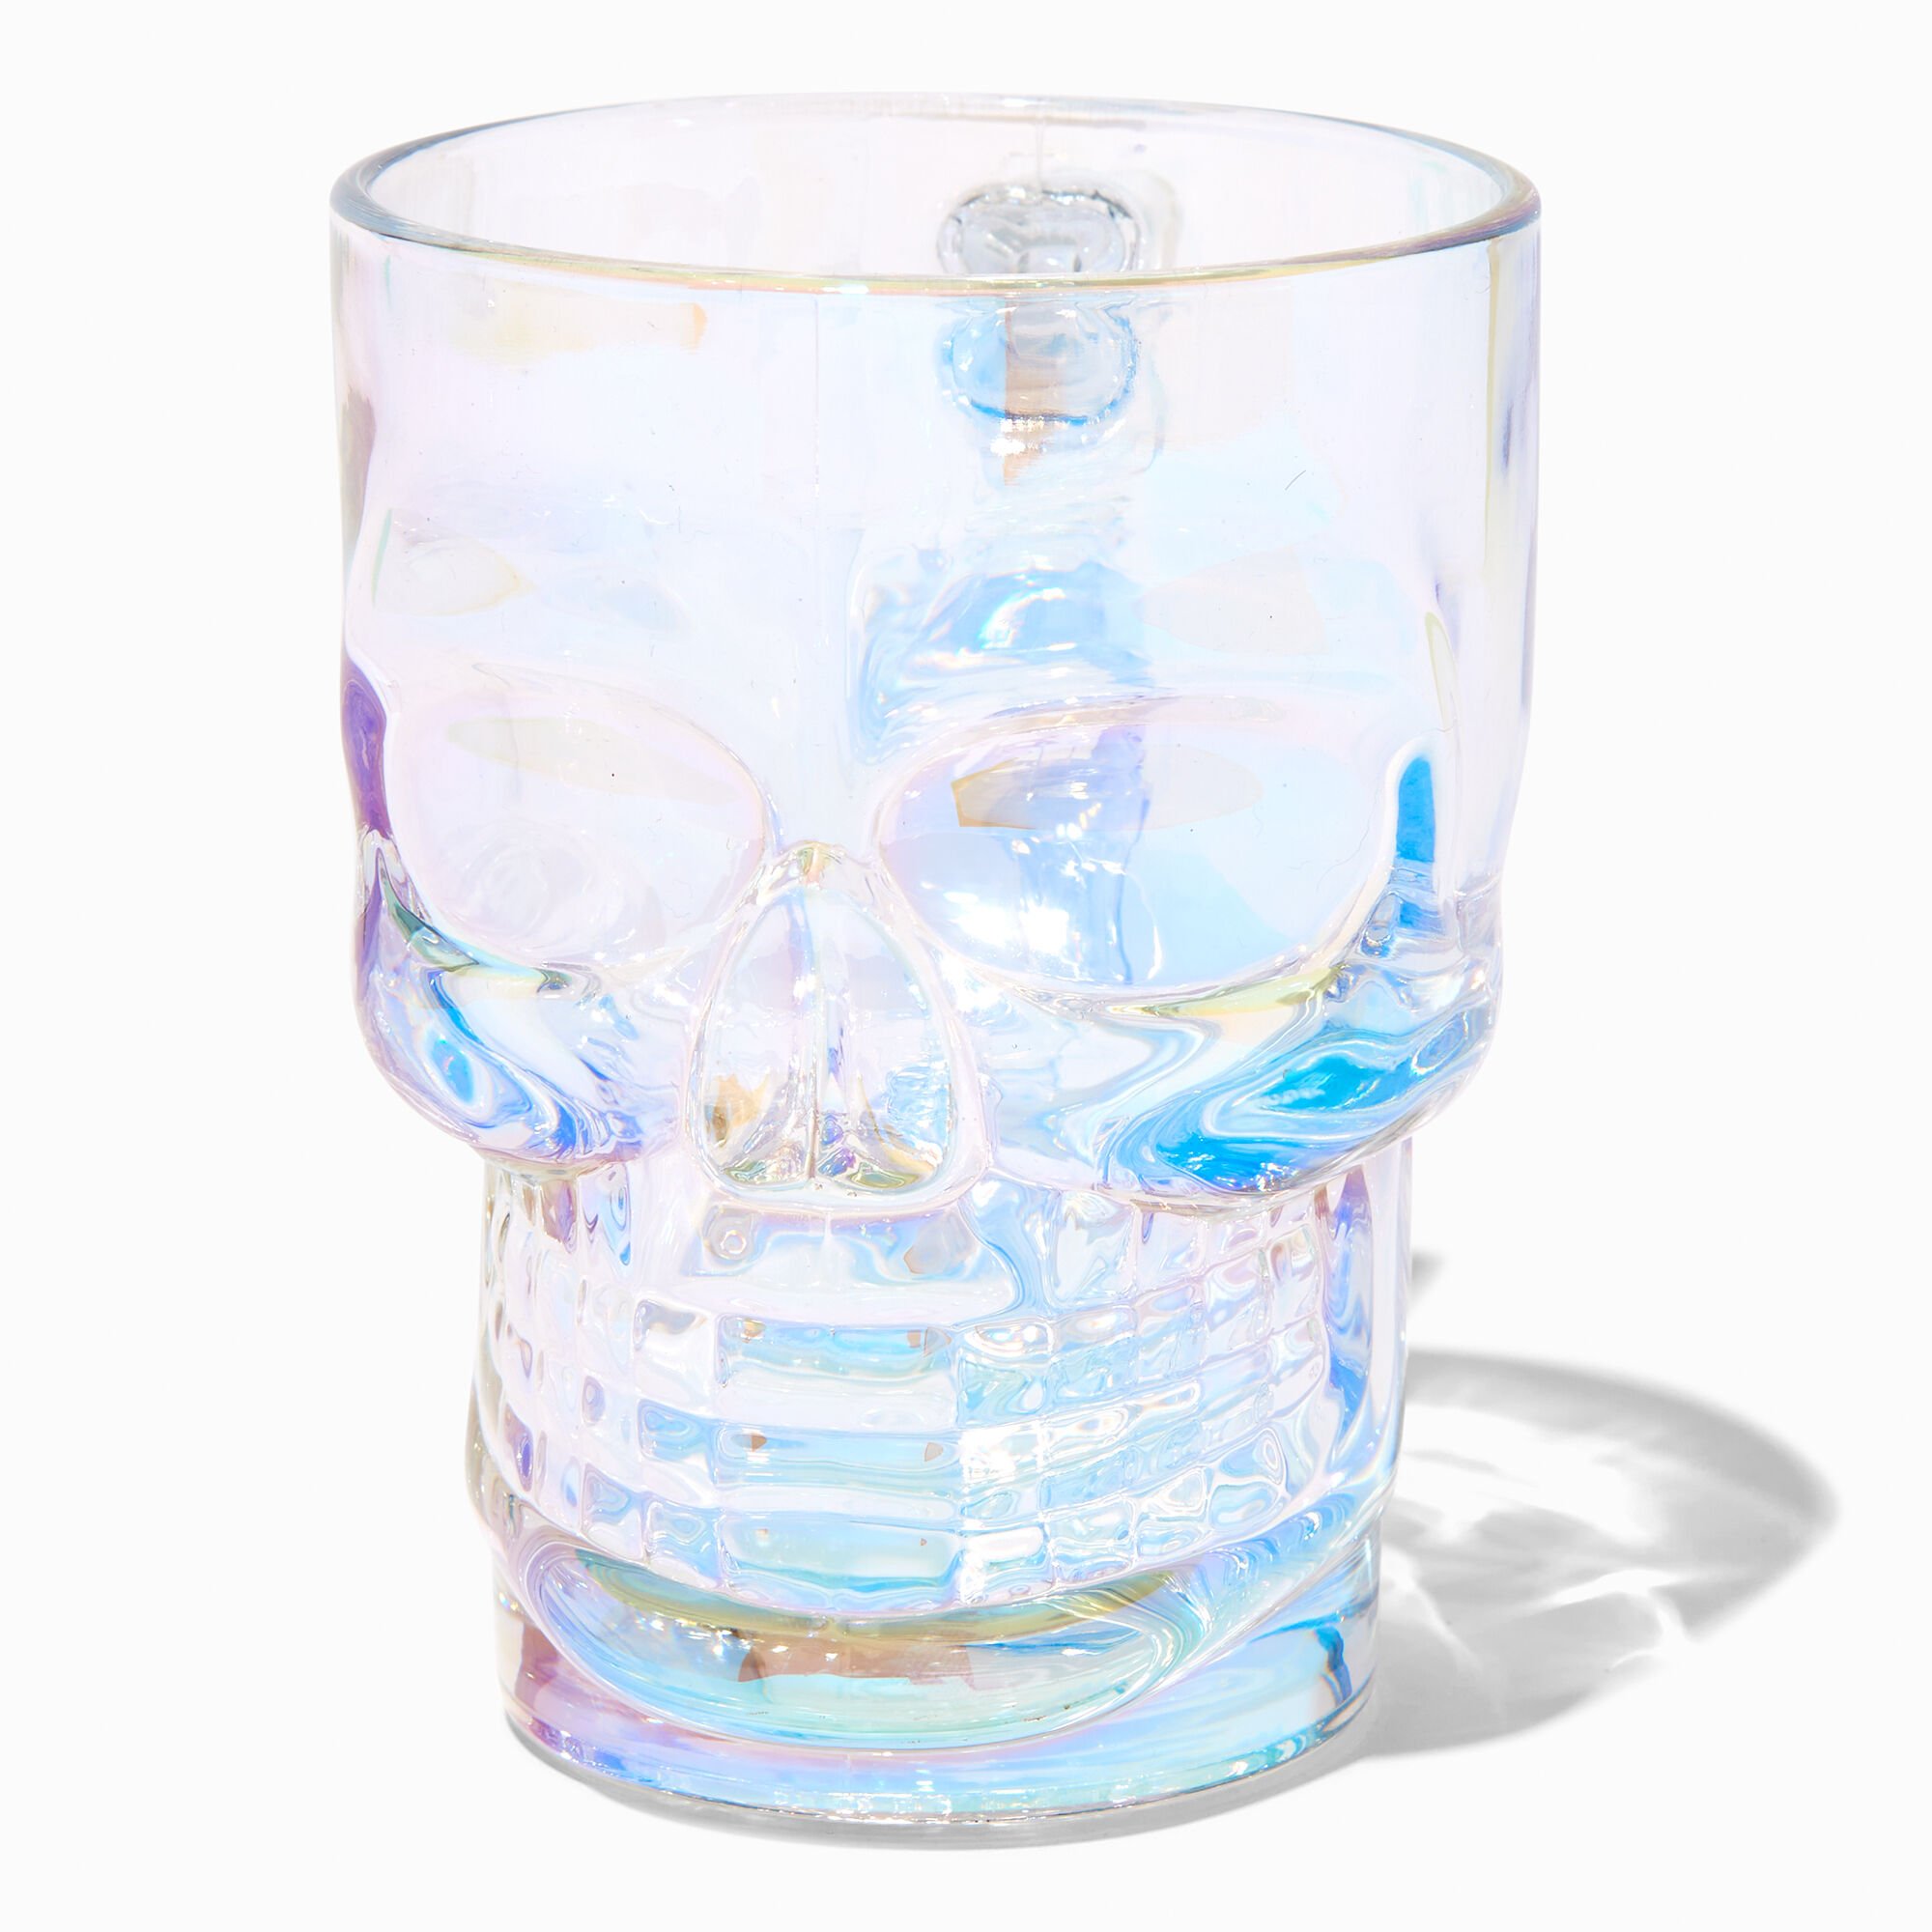 View Claires Iridescent Skull Glass Mug information